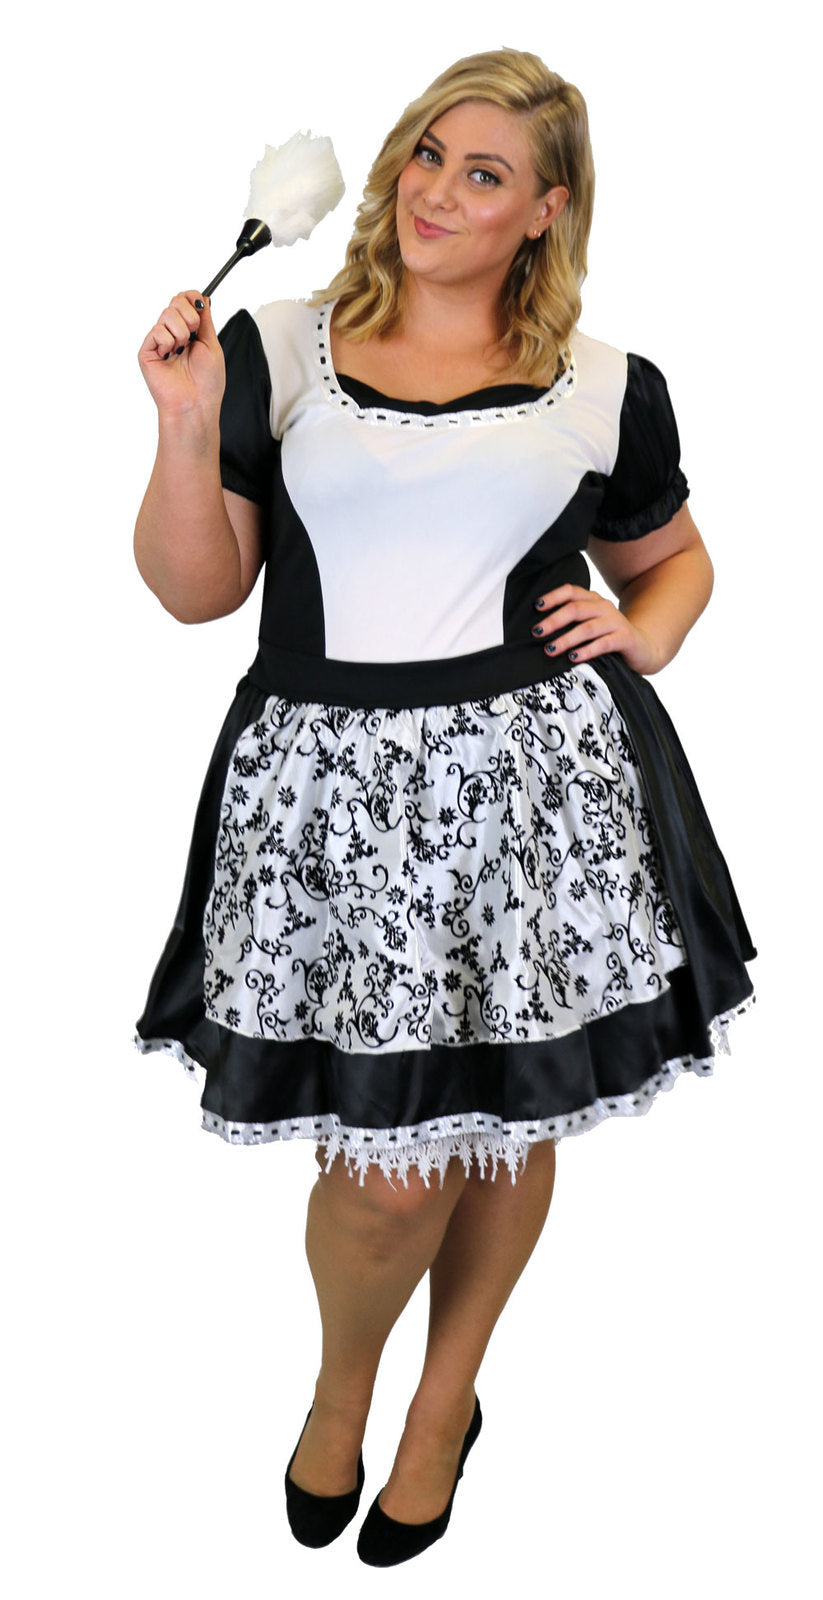 French Maid Plus Size Women's Costume Fancy Dress Party